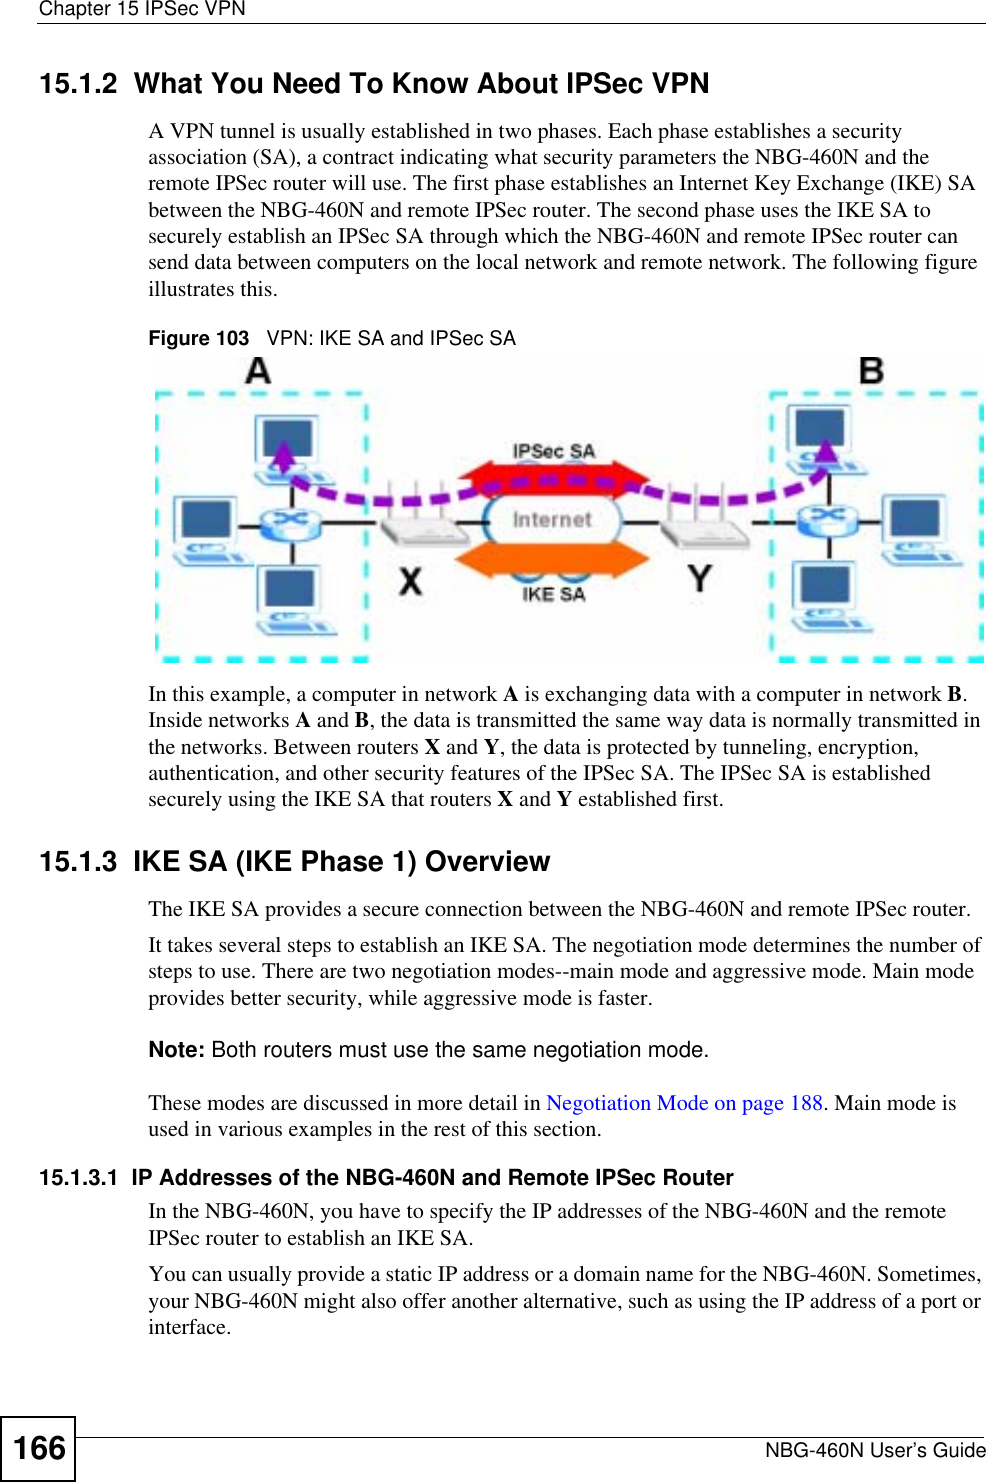 Chapter 15 IPSec VPNNBG-460N User’s Guide16615.1.2  What You Need To Know About IPSec VPNA VPN tunnel is usually established in two phases. Each phase establishes a security association (SA), a contract indicating what security parameters the NBG-460N and the remote IPSec router will use. The first phase establishes an Internet Key Exchange (IKE) SA between the NBG-460N and remote IPSec router. The second phase uses the IKE SA to securely establish an IPSec SA through which the NBG-460N and remote IPSec router can send data between computers on the local network and remote network. The following figure illustrates this.Figure 103   VPN: IKE SA and IPSec SA In this example, a computer in network A is exchanging data with a computer in network B.Inside networks A and B, the data is transmitted the same way data is normally transmitted in the networks. Between routers X and Y, the data is protected by tunneling, encryption, authentication, and other security features of the IPSec SA. The IPSec SA is established securely using the IKE SA that routers X and Y established first.15.1.3  IKE SA (IKE Phase 1) OverviewThe IKE SA provides a secure connection between the NBG-460N and remote IPSec router.It takes several steps to establish an IKE SA. The negotiation mode determines the number of steps to use. There are two negotiation modes--main mode and aggressive mode. Main mode provides better security, while aggressive mode is faster.Note: Both routers must use the same negotiation mode.These modes are discussed in more detail in Negotiation Mode on page 188. Main mode is used in various examples in the rest of this section.15.1.3.1  IP Addresses of the NBG-460N and Remote IPSec RouterIn the NBG-460N, you have to specify the IP addresses of the NBG-460N and the remote IPSec router to establish an IKE SA.You can usually provide a static IP address or a domain name for the NBG-460N. Sometimes, your NBG-460N might also offer another alternative, such as using the IP address of a port or interface.